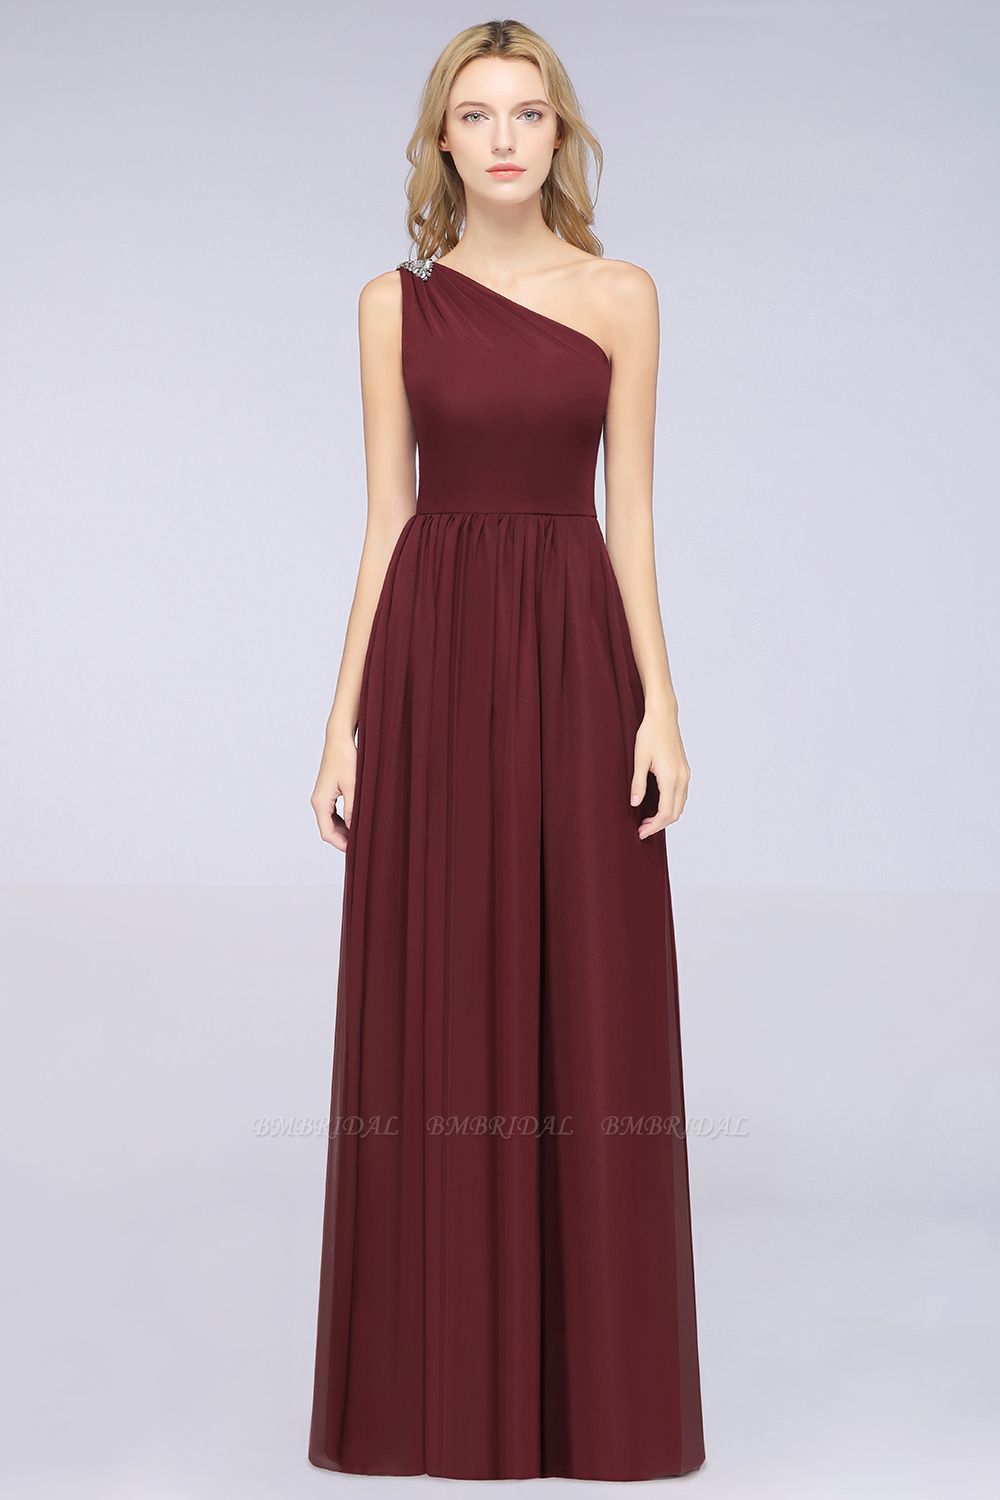 BMbridal Affordable Chiffon One-Shoulder Ruffle Bridesmaid Dress with Beadings